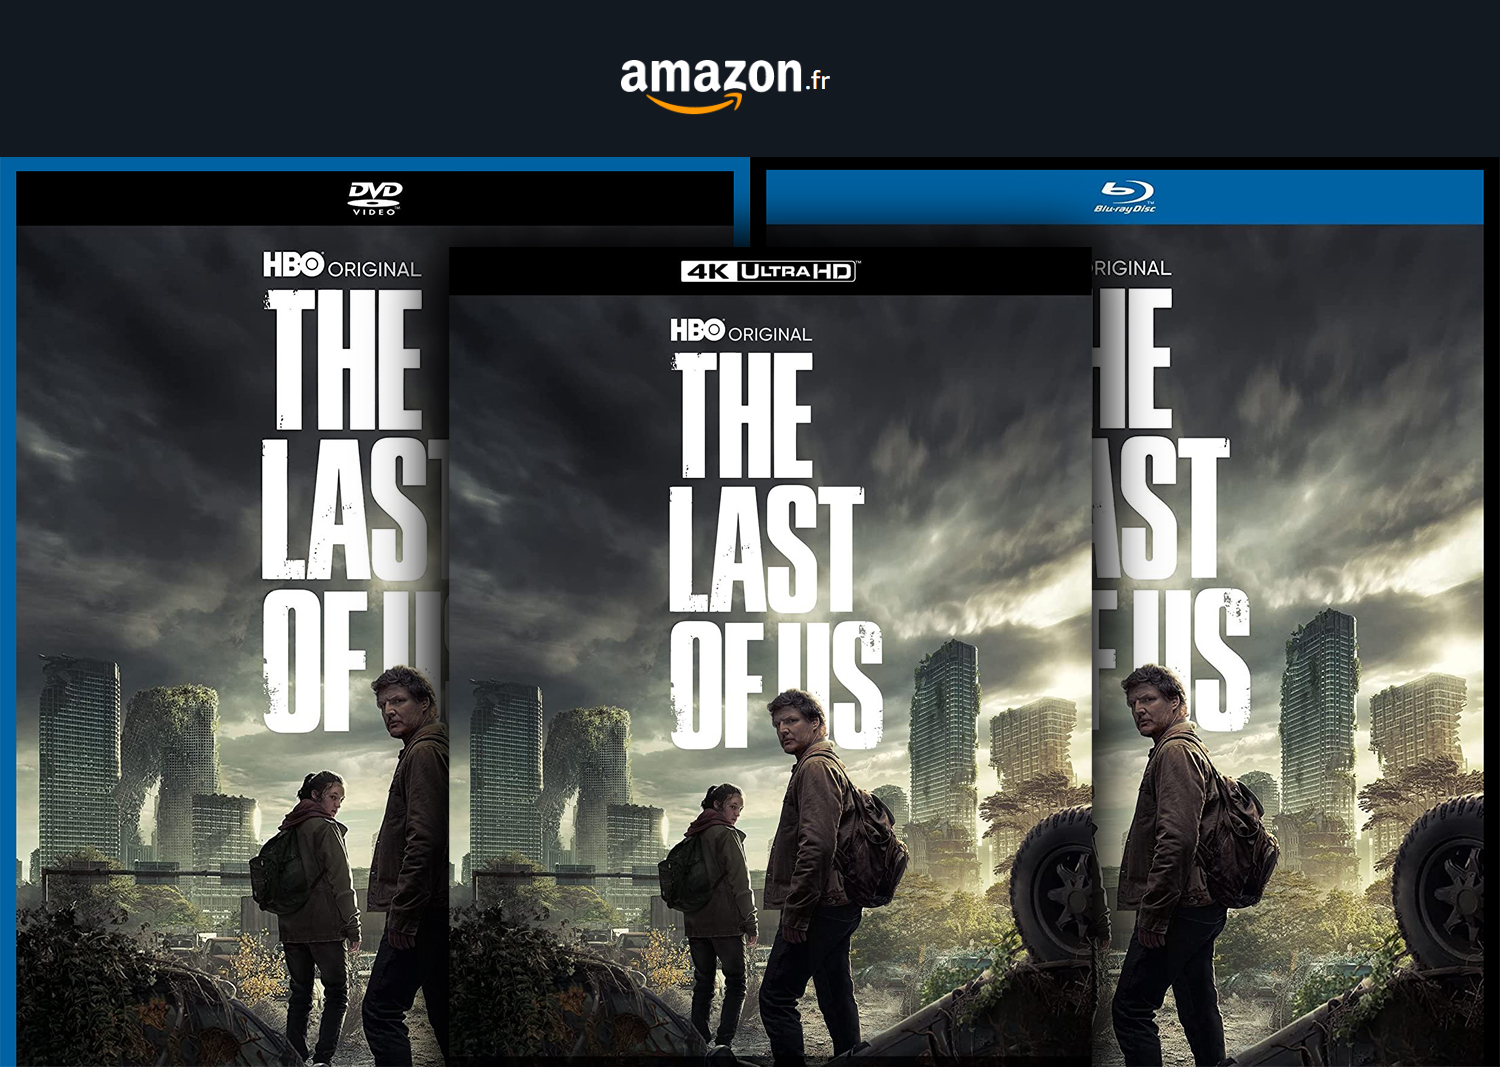 The Last of Us: The Complete First Season 4K Blu-ray (4K Ultra HD)